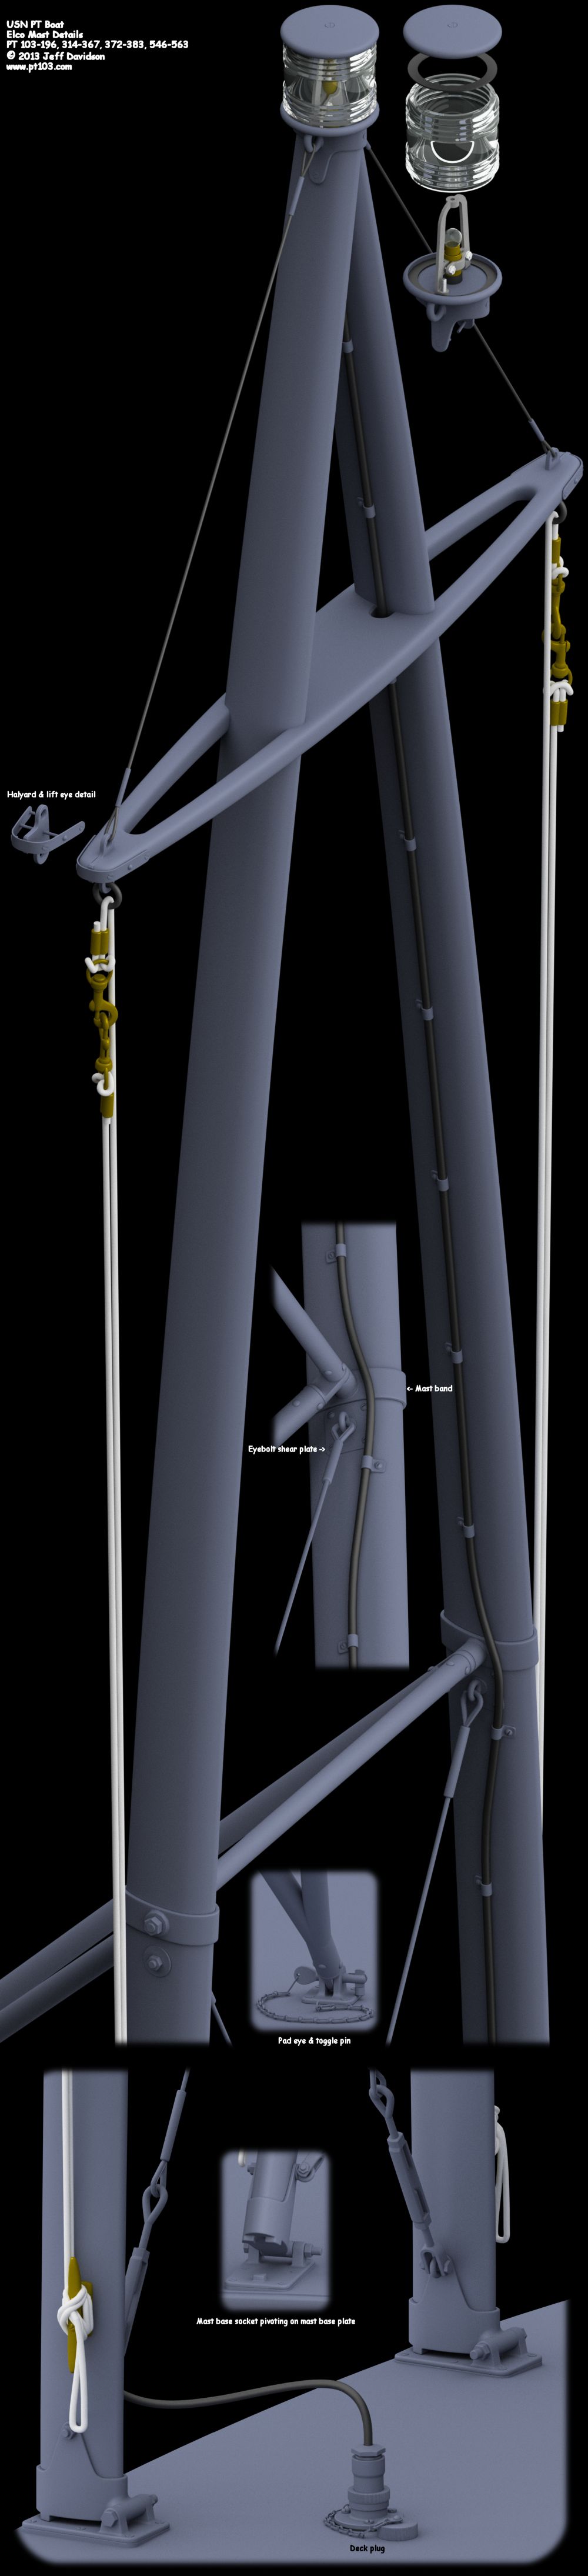 Elco PT Boat 103 Class Mast Perspective